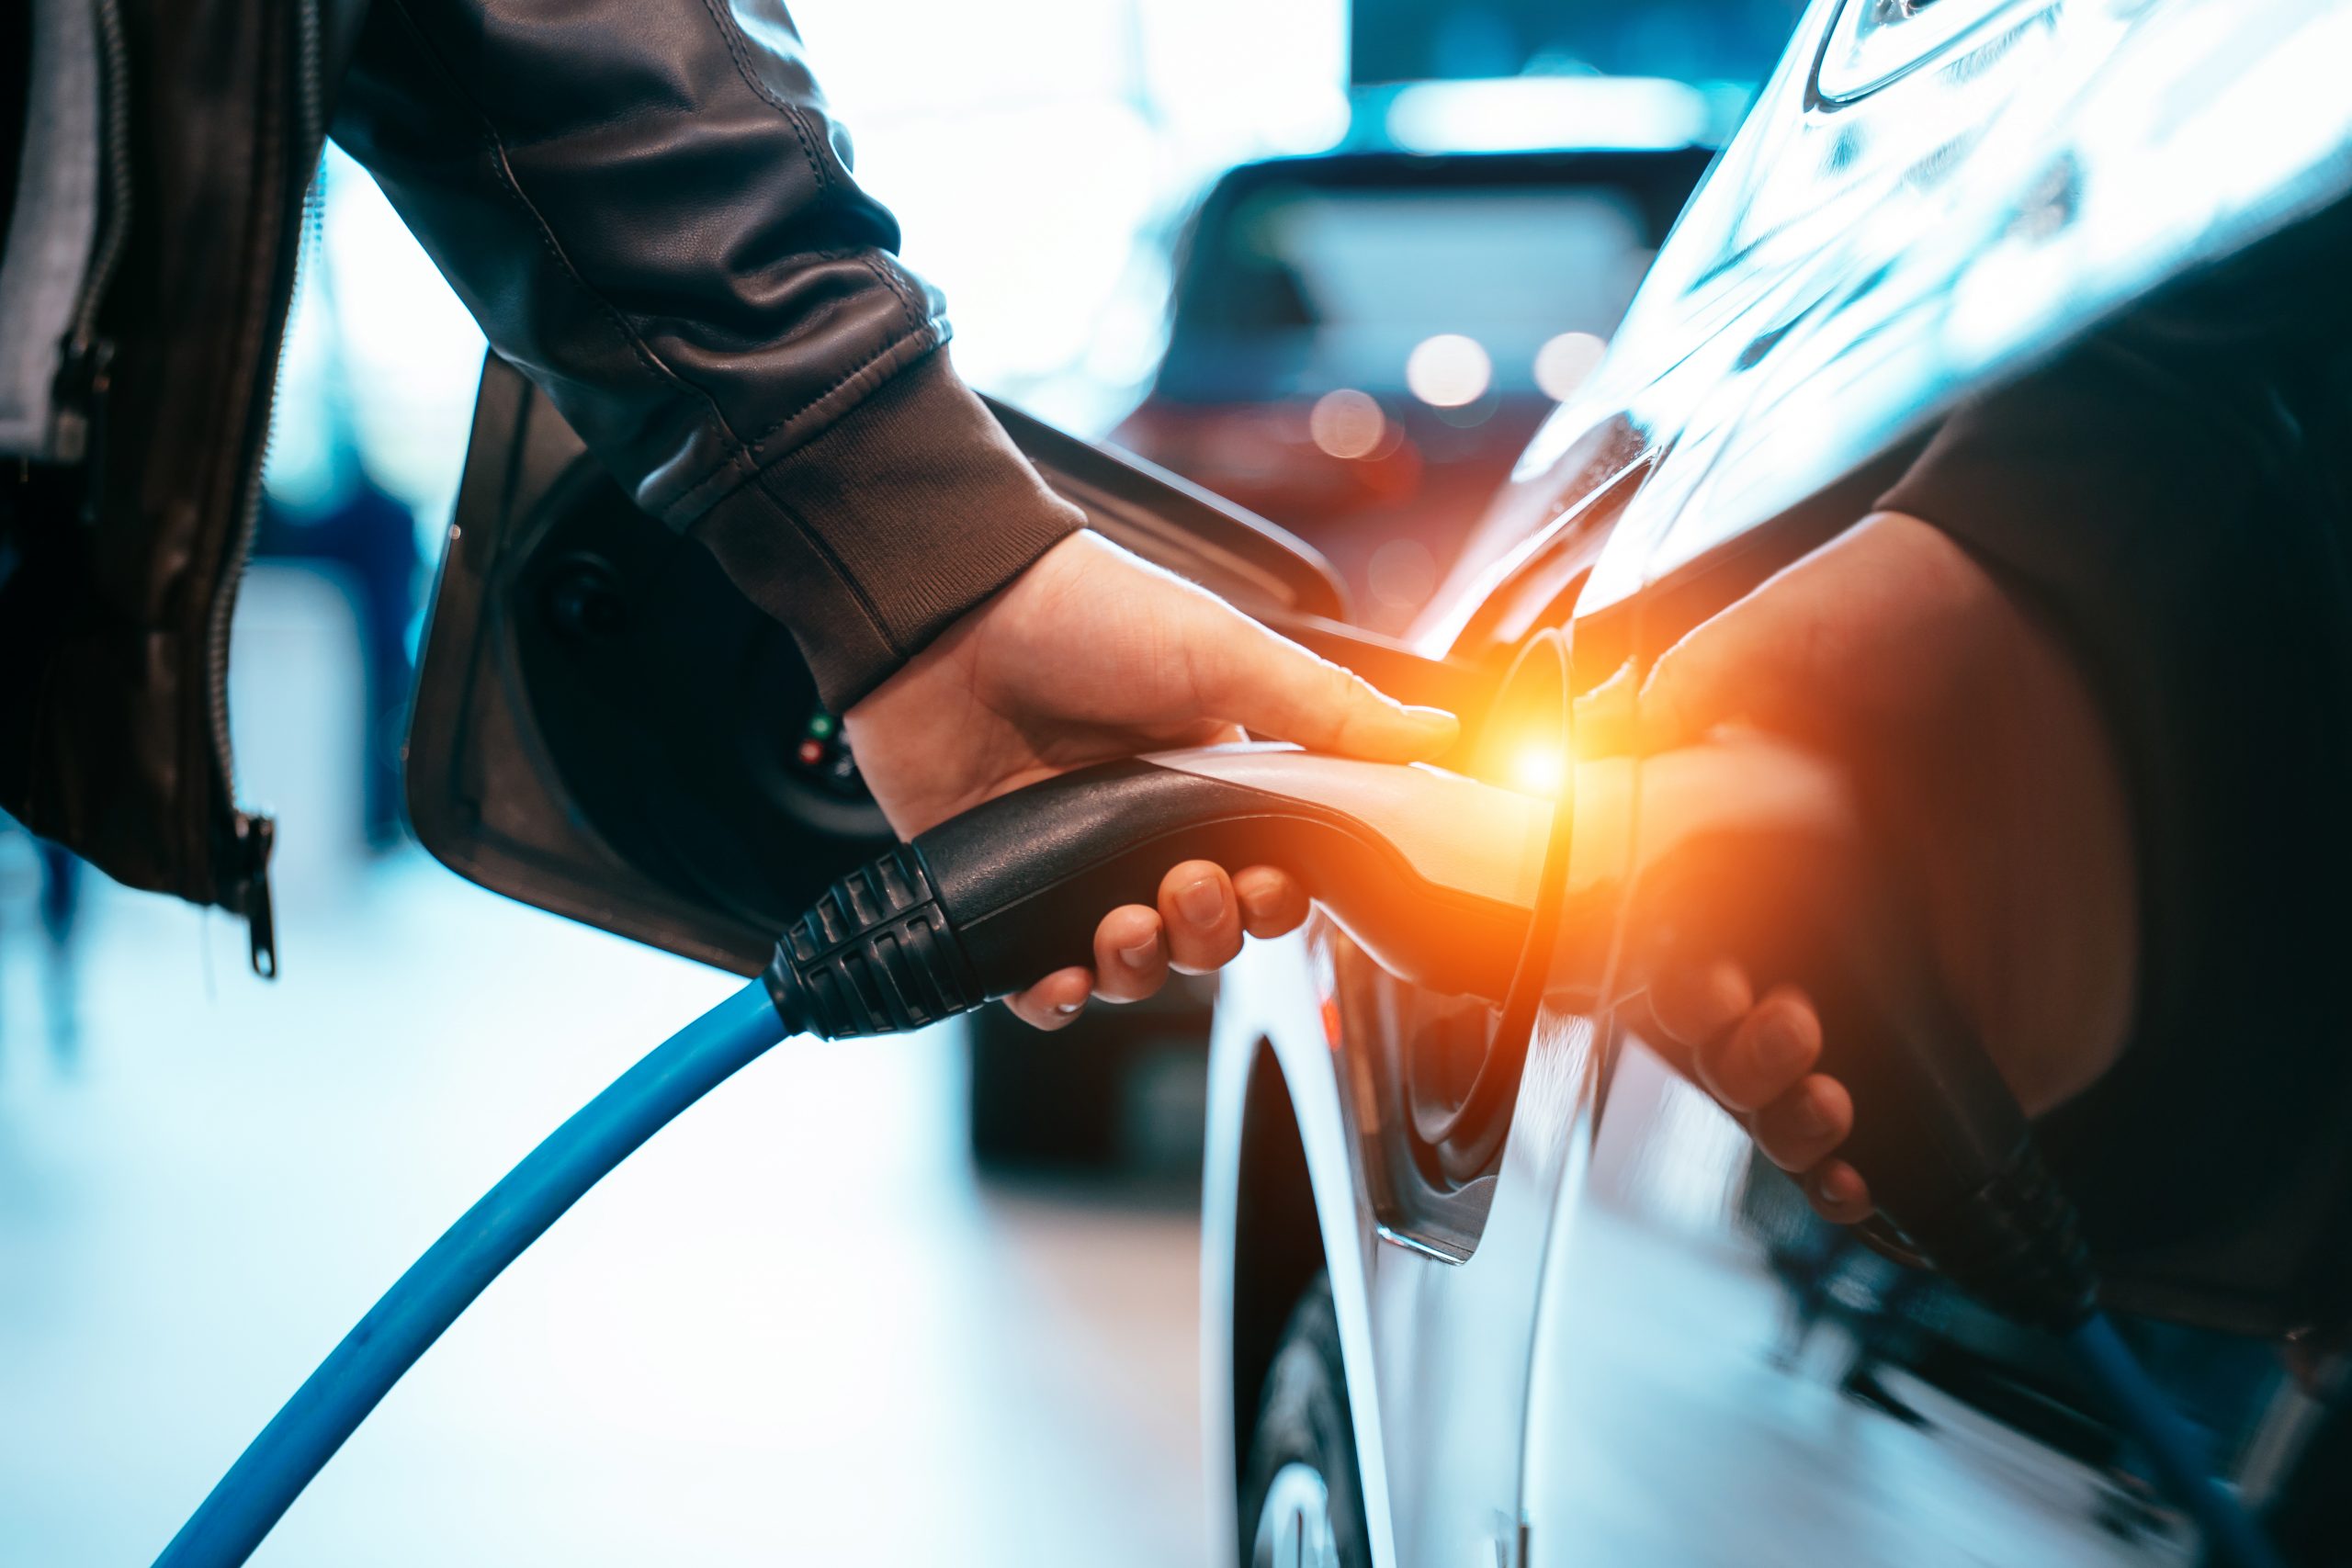 A man's hand plugging in an electric car for charging